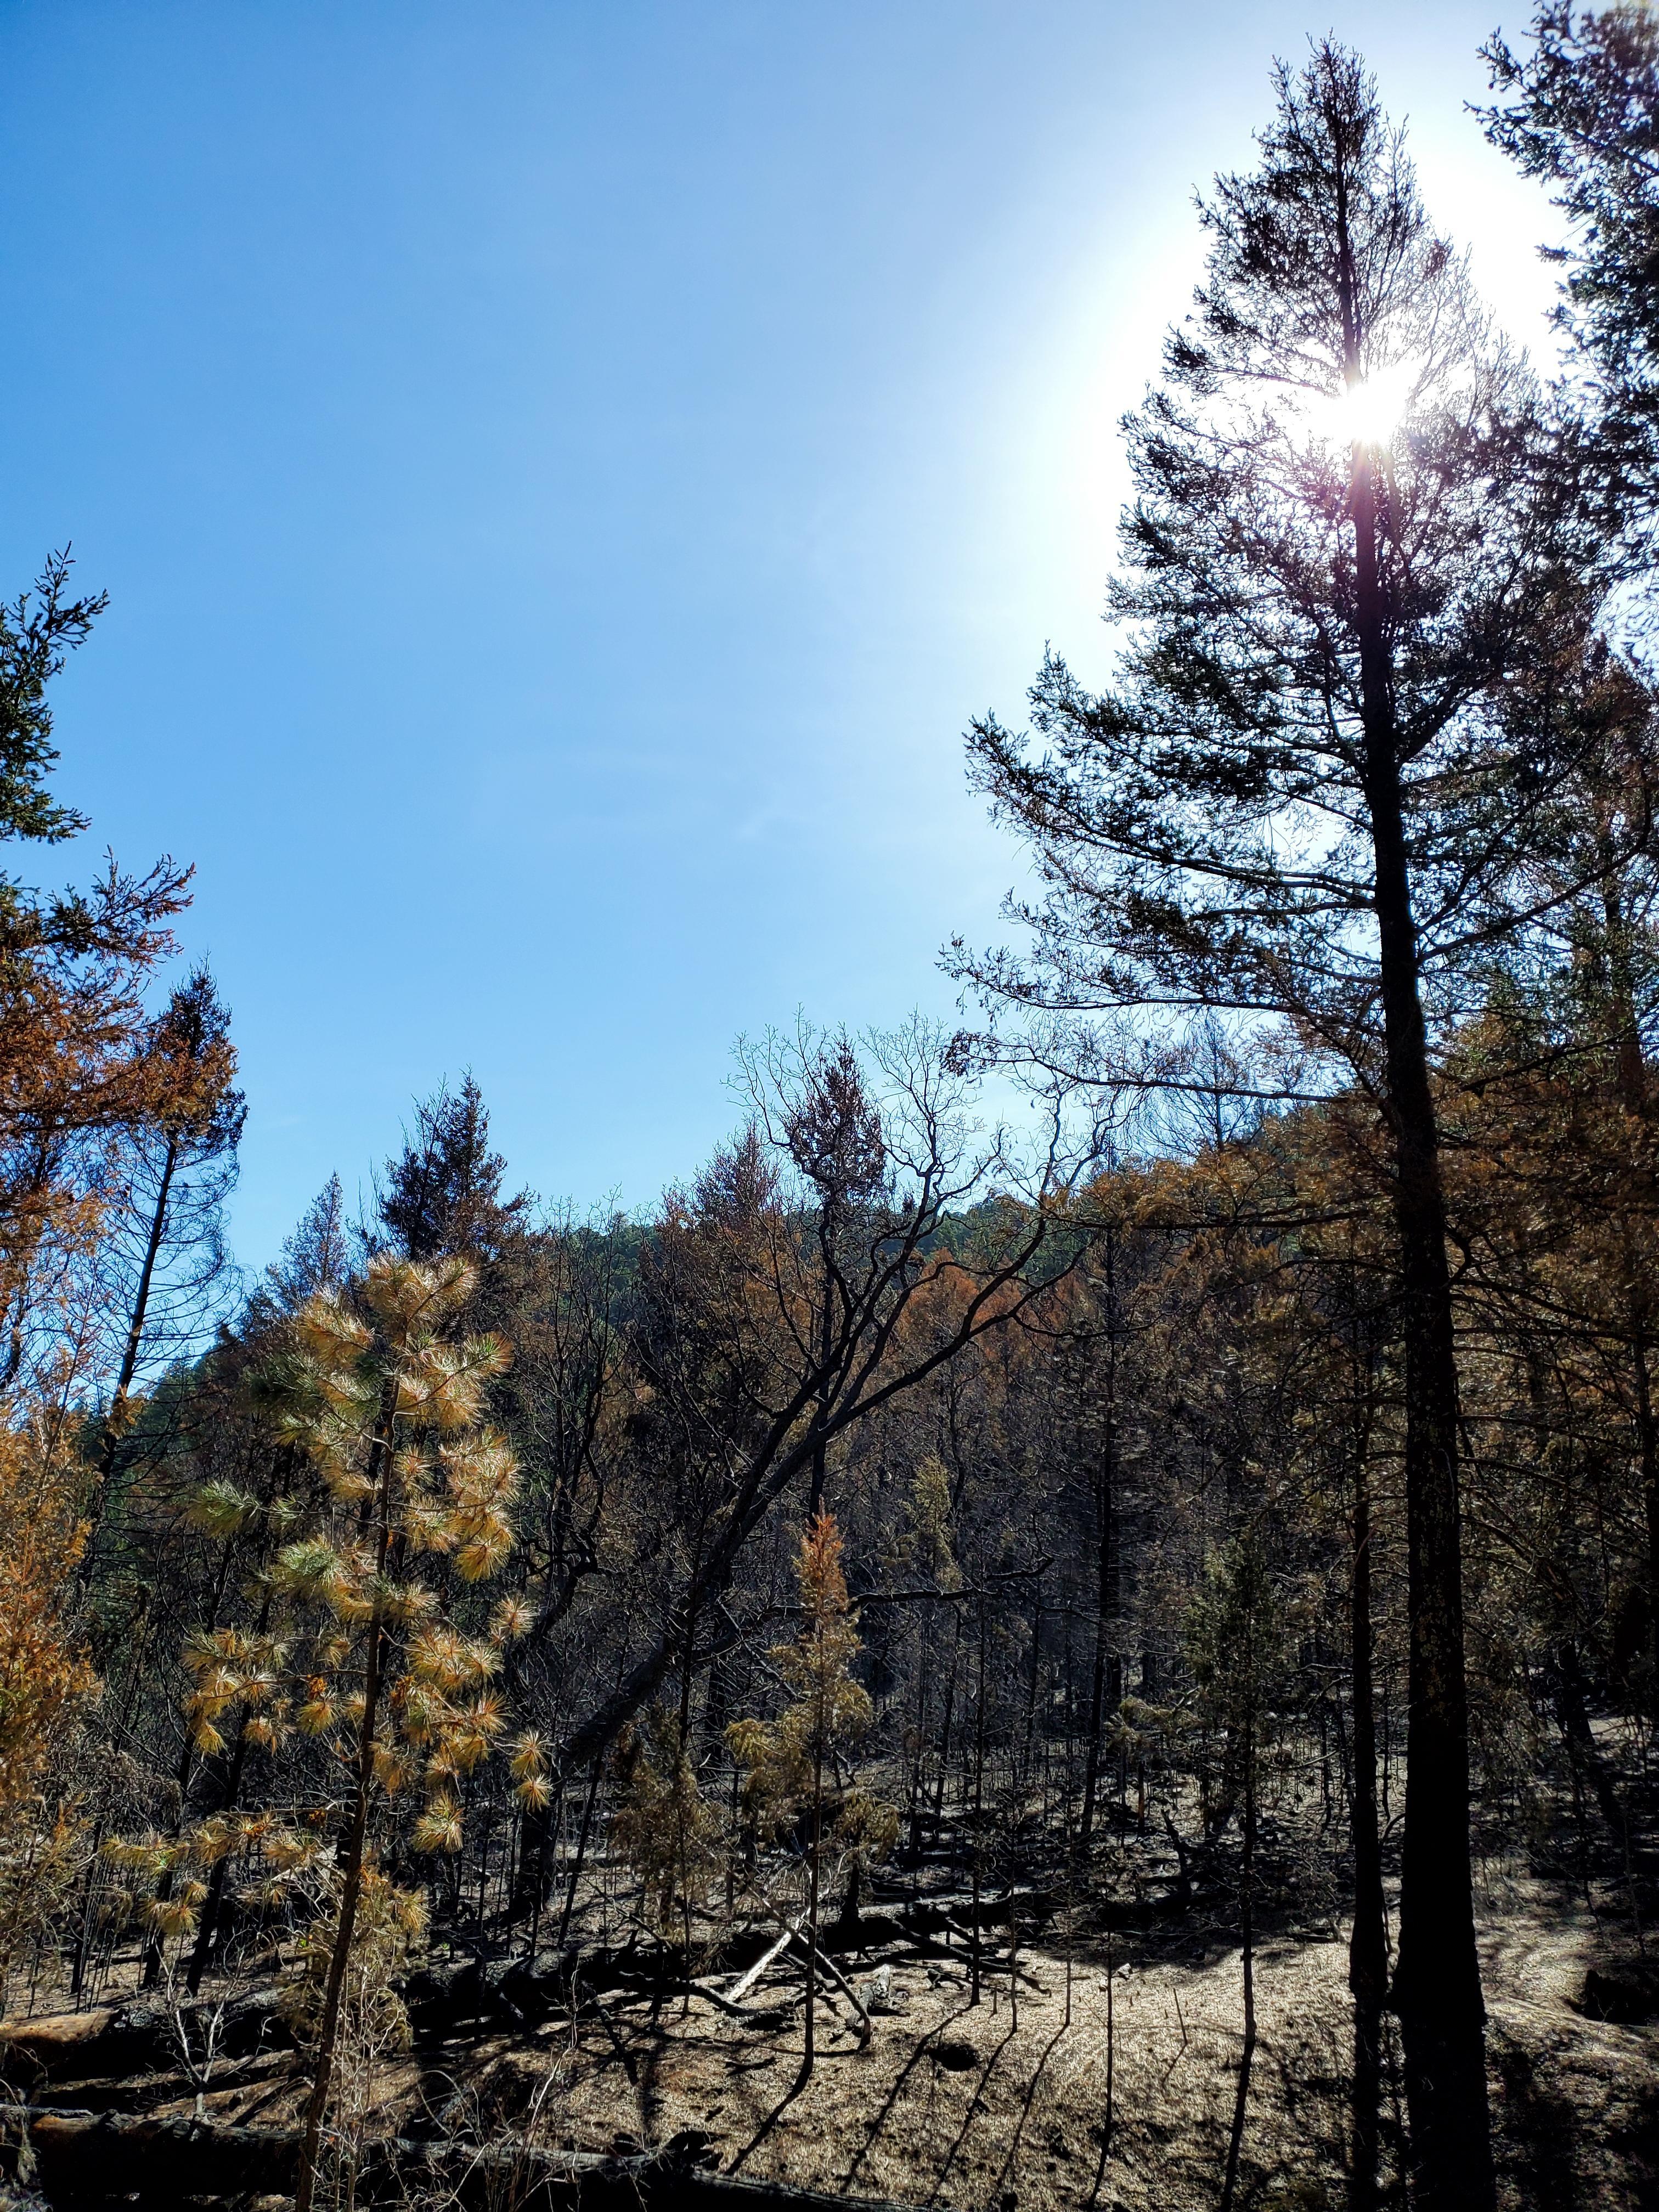 Photo shows a stand with moderate soil burn severity with patches of unburned fuels.  